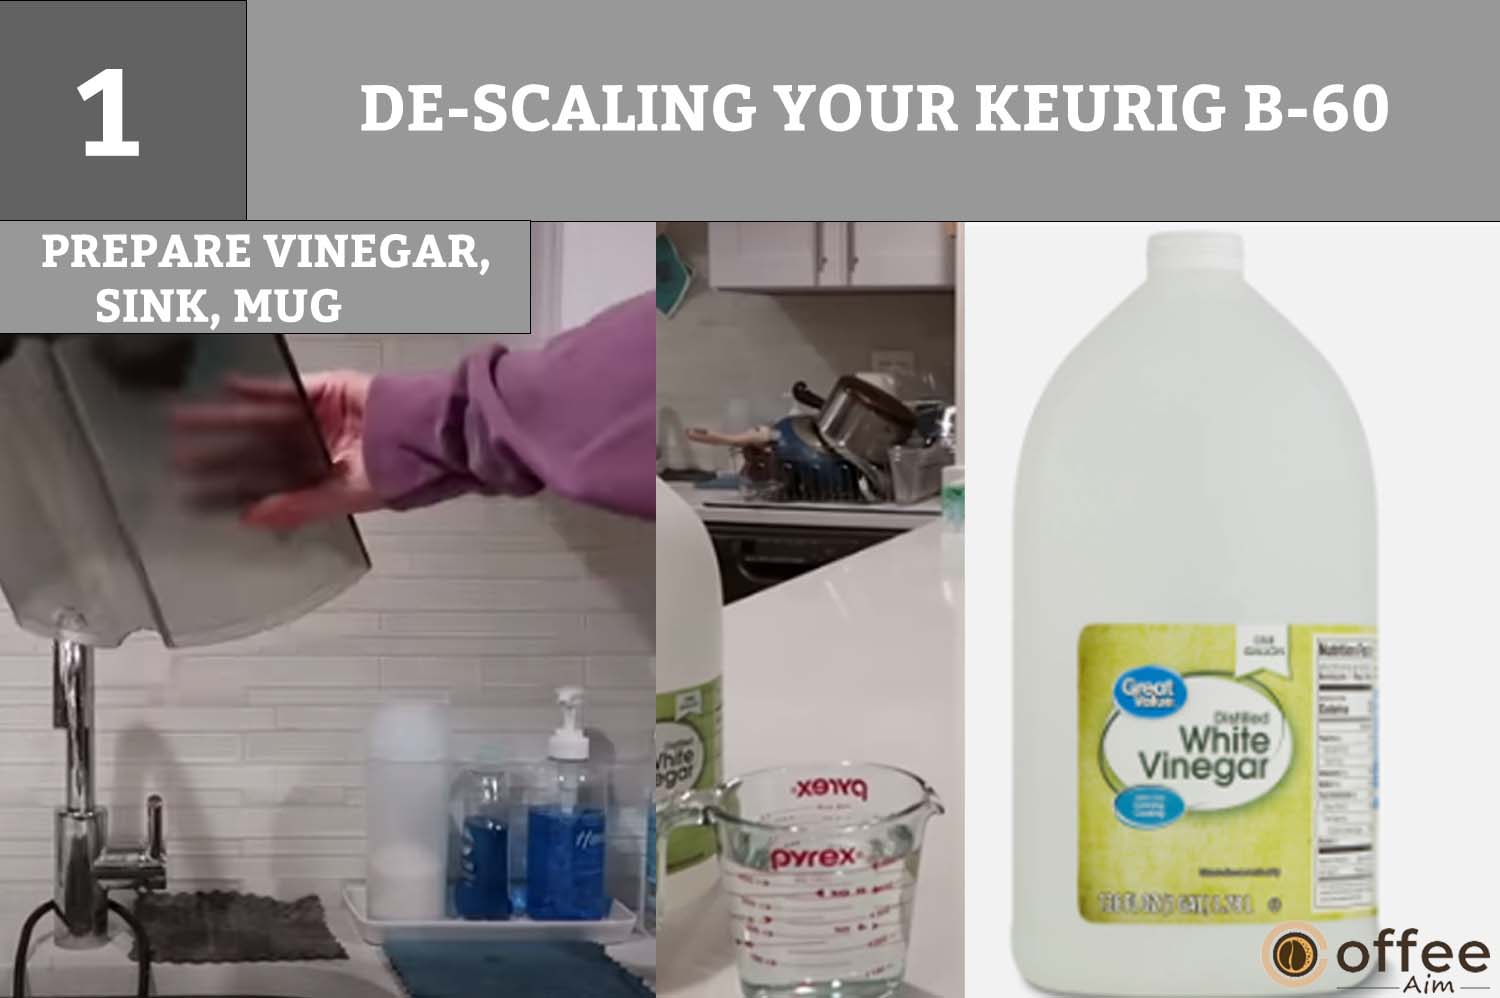 Before descaling, gather 48 ounces of undiluted white vinegar, an empty sink, and a large ceramic mug (avoid using a paper cup).